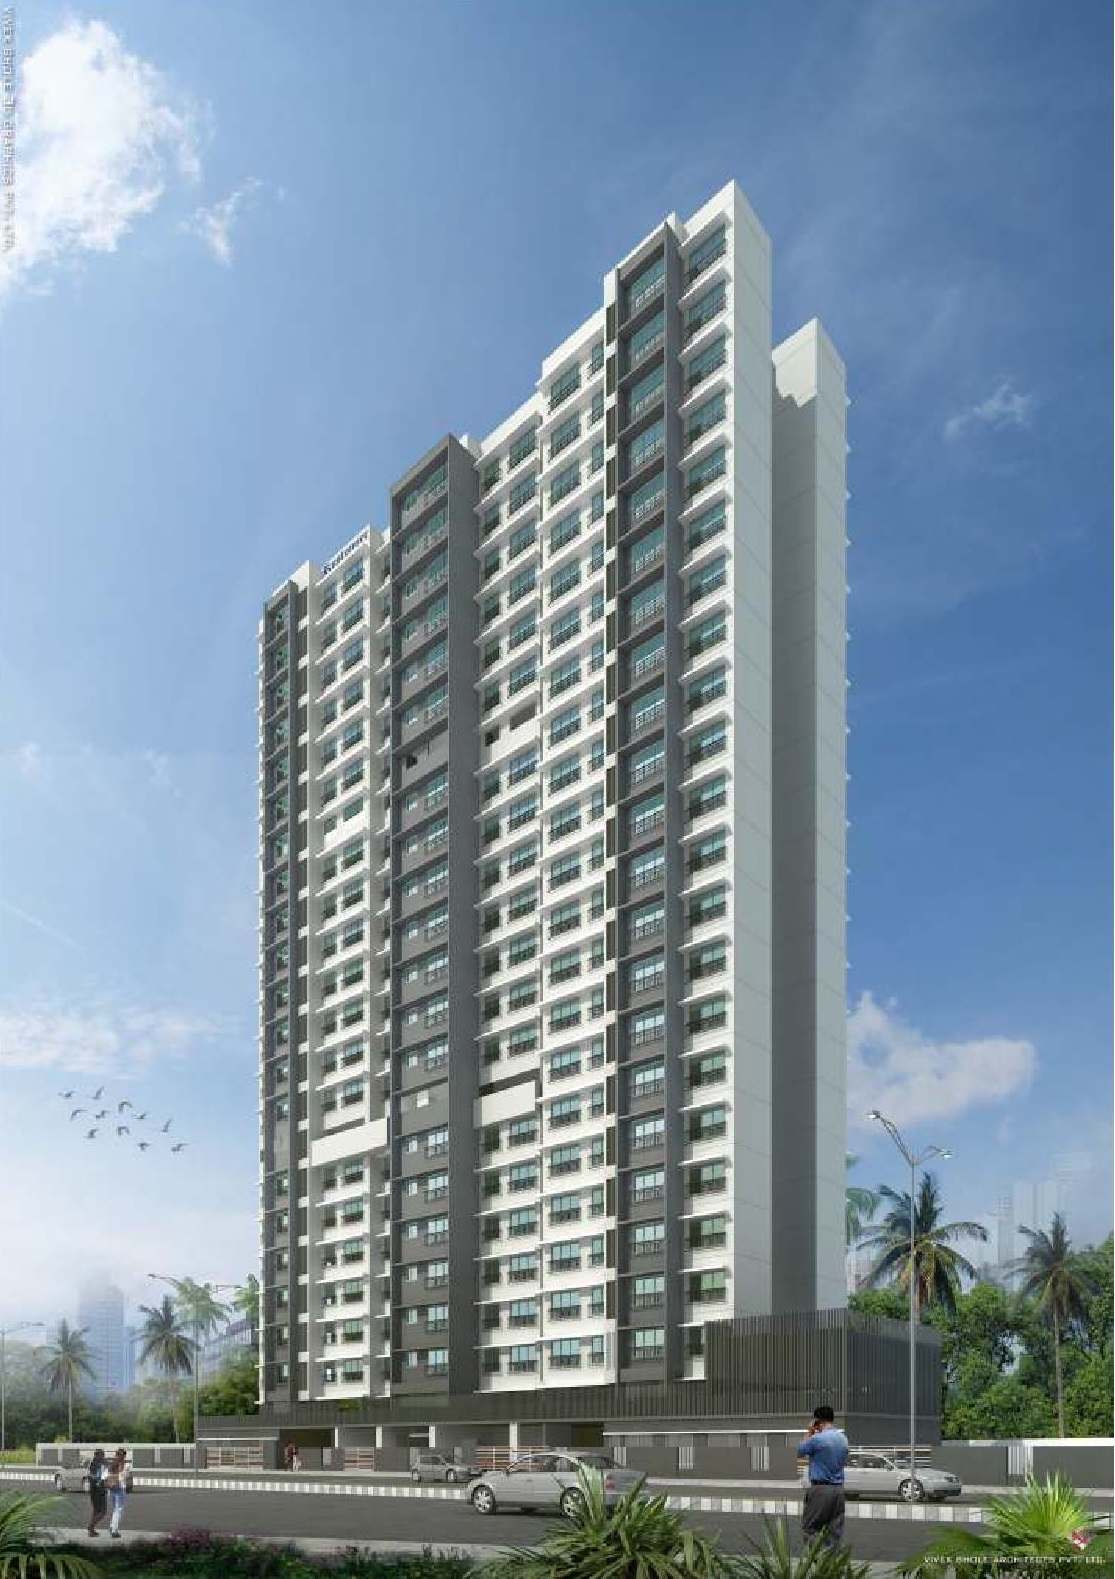 Live in home with concept of personal space at Rustomjee Pinnacle in Mumbai